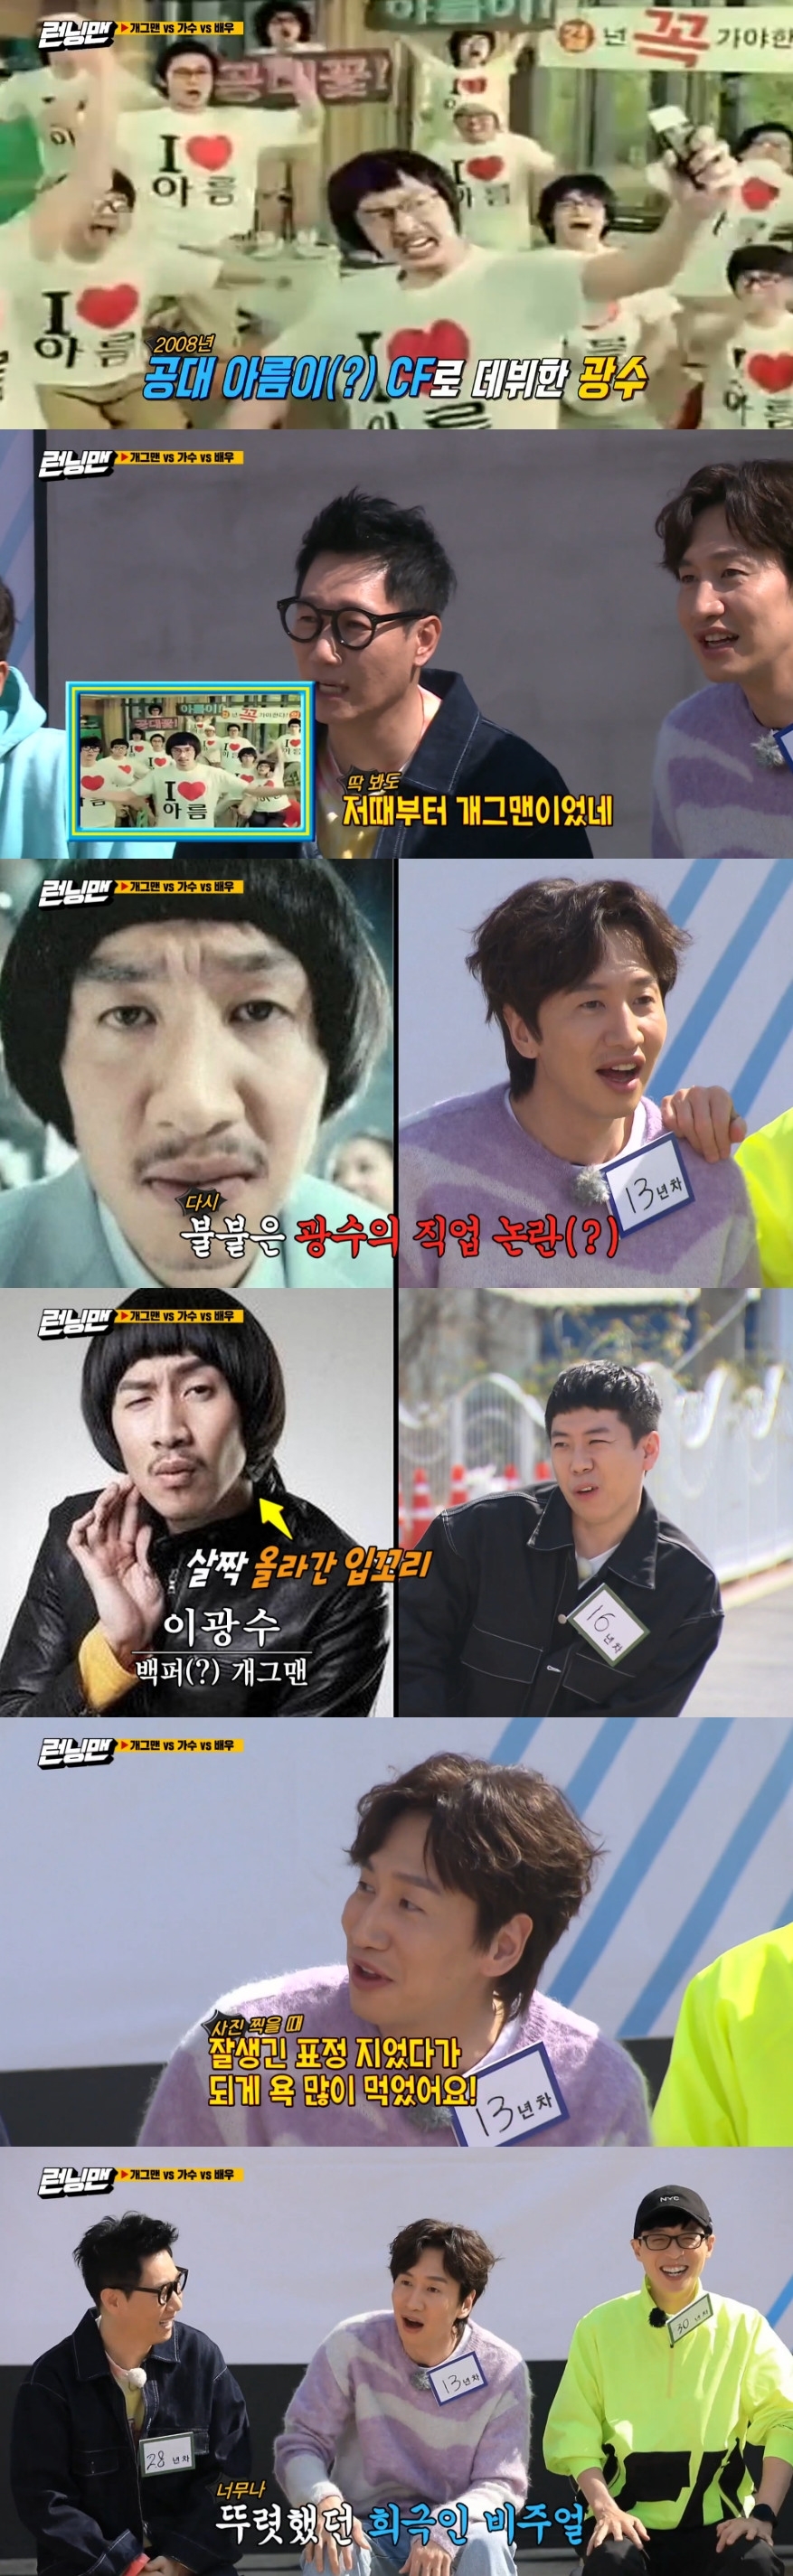 Actor Lee Kwangsoo was humiliated by Identity 12 years ago due to past photos.It was decorated with Running Man Clath on SBS Running Man broadcast on April 19th.On this day, singer Noh Sa-yeon, Hong Jin-young, group SF9 members and actors Roane and Actor Lee Do-hyun appeared as guests.The cast was divided into three teams: the Comedian team, the singer team, and the Actor team.The mission to meet the popular songs of the era presented by the production team, and the mission to end the dress with the given keywords, and laughed at the viewers.Yoo Jae-Suk asked if Lee Kwangsoo was a bit ambiguous when he became an Actor team, Is Kwangsoo a bit of a comedian and an actor?Haha expressed sympathy as Jack Black of Korea, Jim Carrey of Korea.Lee Kwangsoo said, Its a very grateful story ... its so good. Yoo Jae-Suk said, There is also Chinas main character.(Those Actors) arent too many, he laughed.The performers decided to play a showdown with an annual badge distributed by the production team prior to the full-scale mission performance. Lee Kwangsoo handed over his 13-year badge.Kwangsoo is 13 years old, too, Yoo Jae-Suk said, explaining that Lee Kwangsoo had (started) from CF on his debut in the entertainment industry.The advert referred to by Lee Kwangsoo is the so-called Architecture Beautiful CF.At this time, CF photos of Lee Kwangsoo were released; Lee Kwangsoo looked like a mustache on a rip-off head.Ji Suk-jin said, It was Comedian from the bottom. Yang Se-chan shouted, That head is the style from the aspiring Comedian.Look at the expression - 100% thats a Comedian profile photo, Yoo Jae-Suk said.Lee Kwangsoo said, When I took a picture that day, I looked handsome and ate a lot of insults. Youre not that.Whats wrong with you these days - why do you look like that? joked Yoo Jae-Suk.Lee Kwangsoo continued to play after that.Lee Kwangsoo, who teamed up with Song Ji-hyo, Lee Do-hyun and Low to sing Wonder Girls So Hot (Saw Hot), added laughter by showing off his high-frequency mosquito singing skills.hwang hye-jin